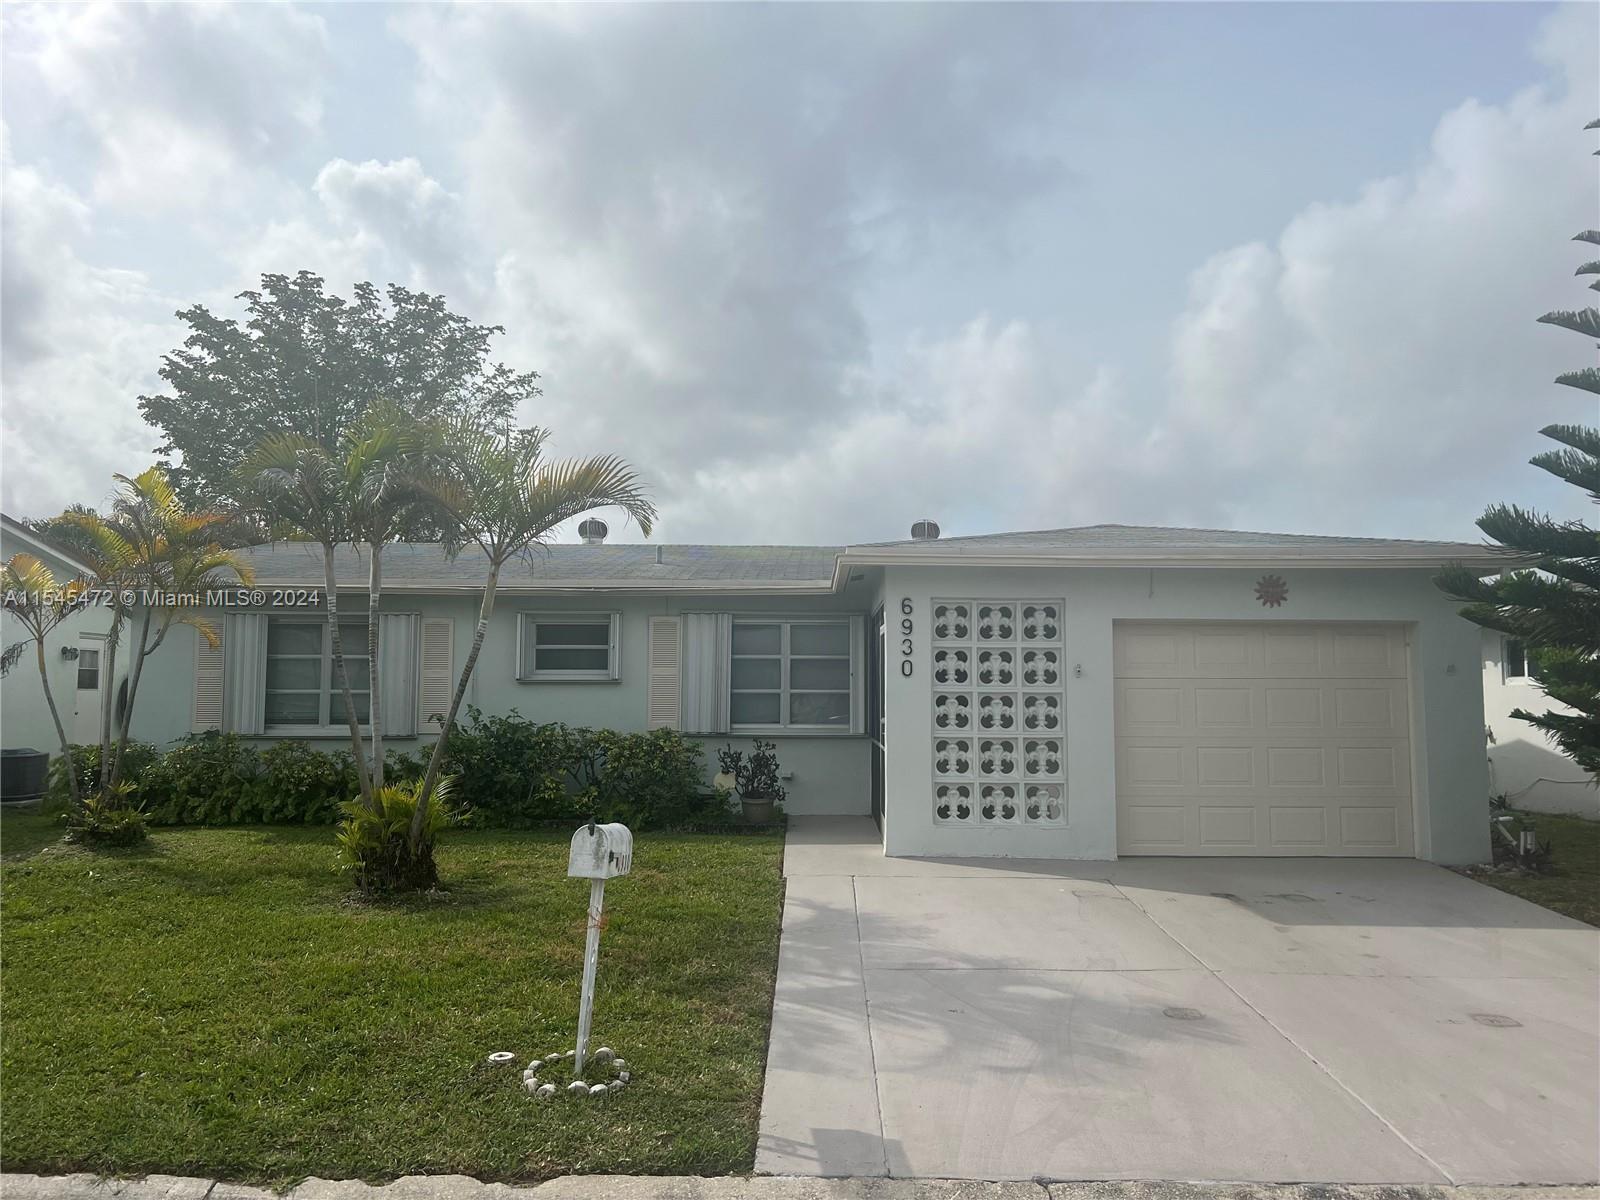 Photo of 6930 NW 11th Ct in Margate, FL